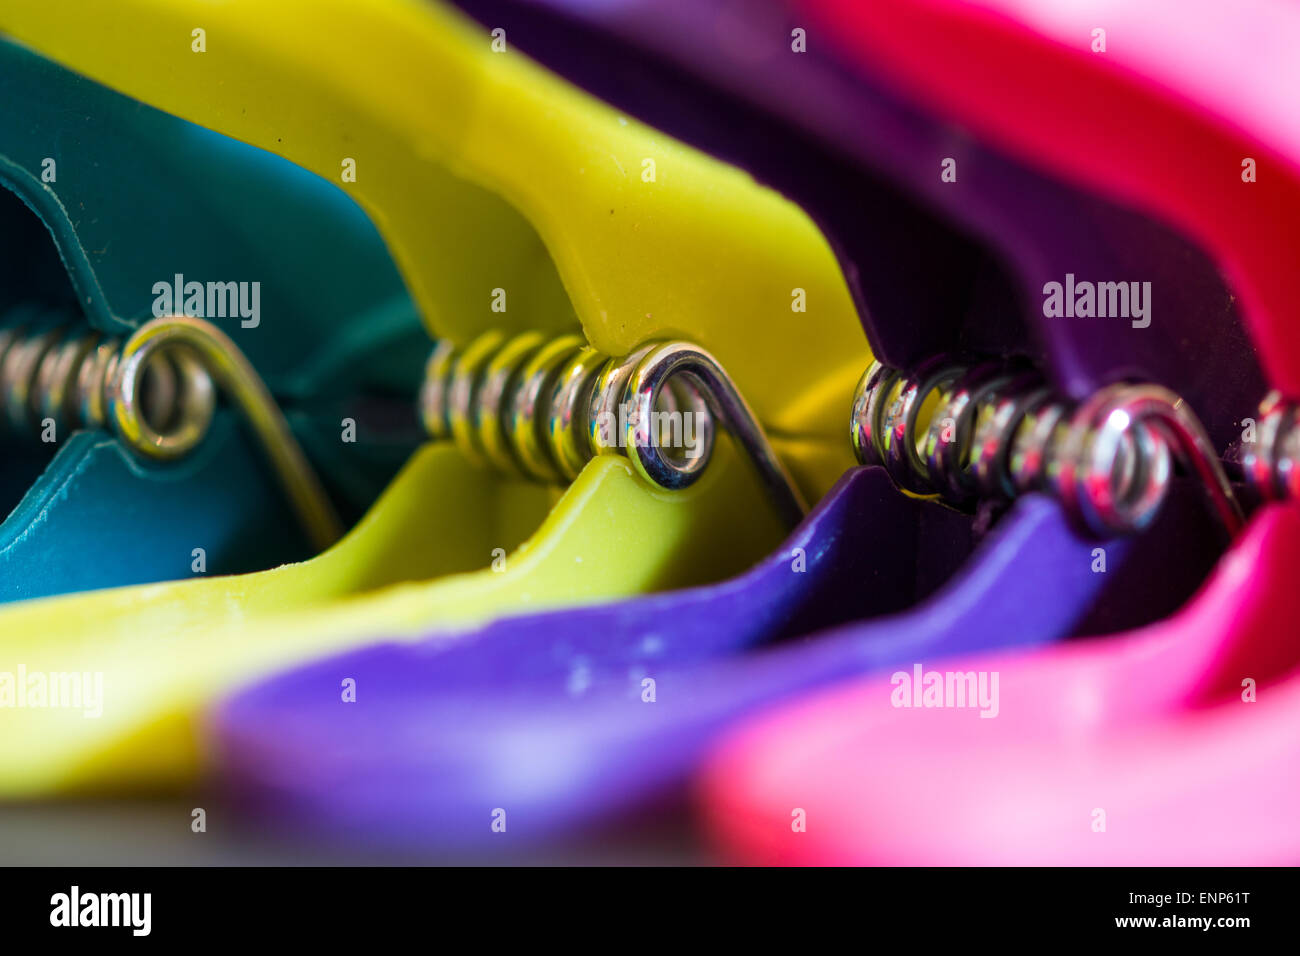 A close up shot of plastic pegs Stock Photo